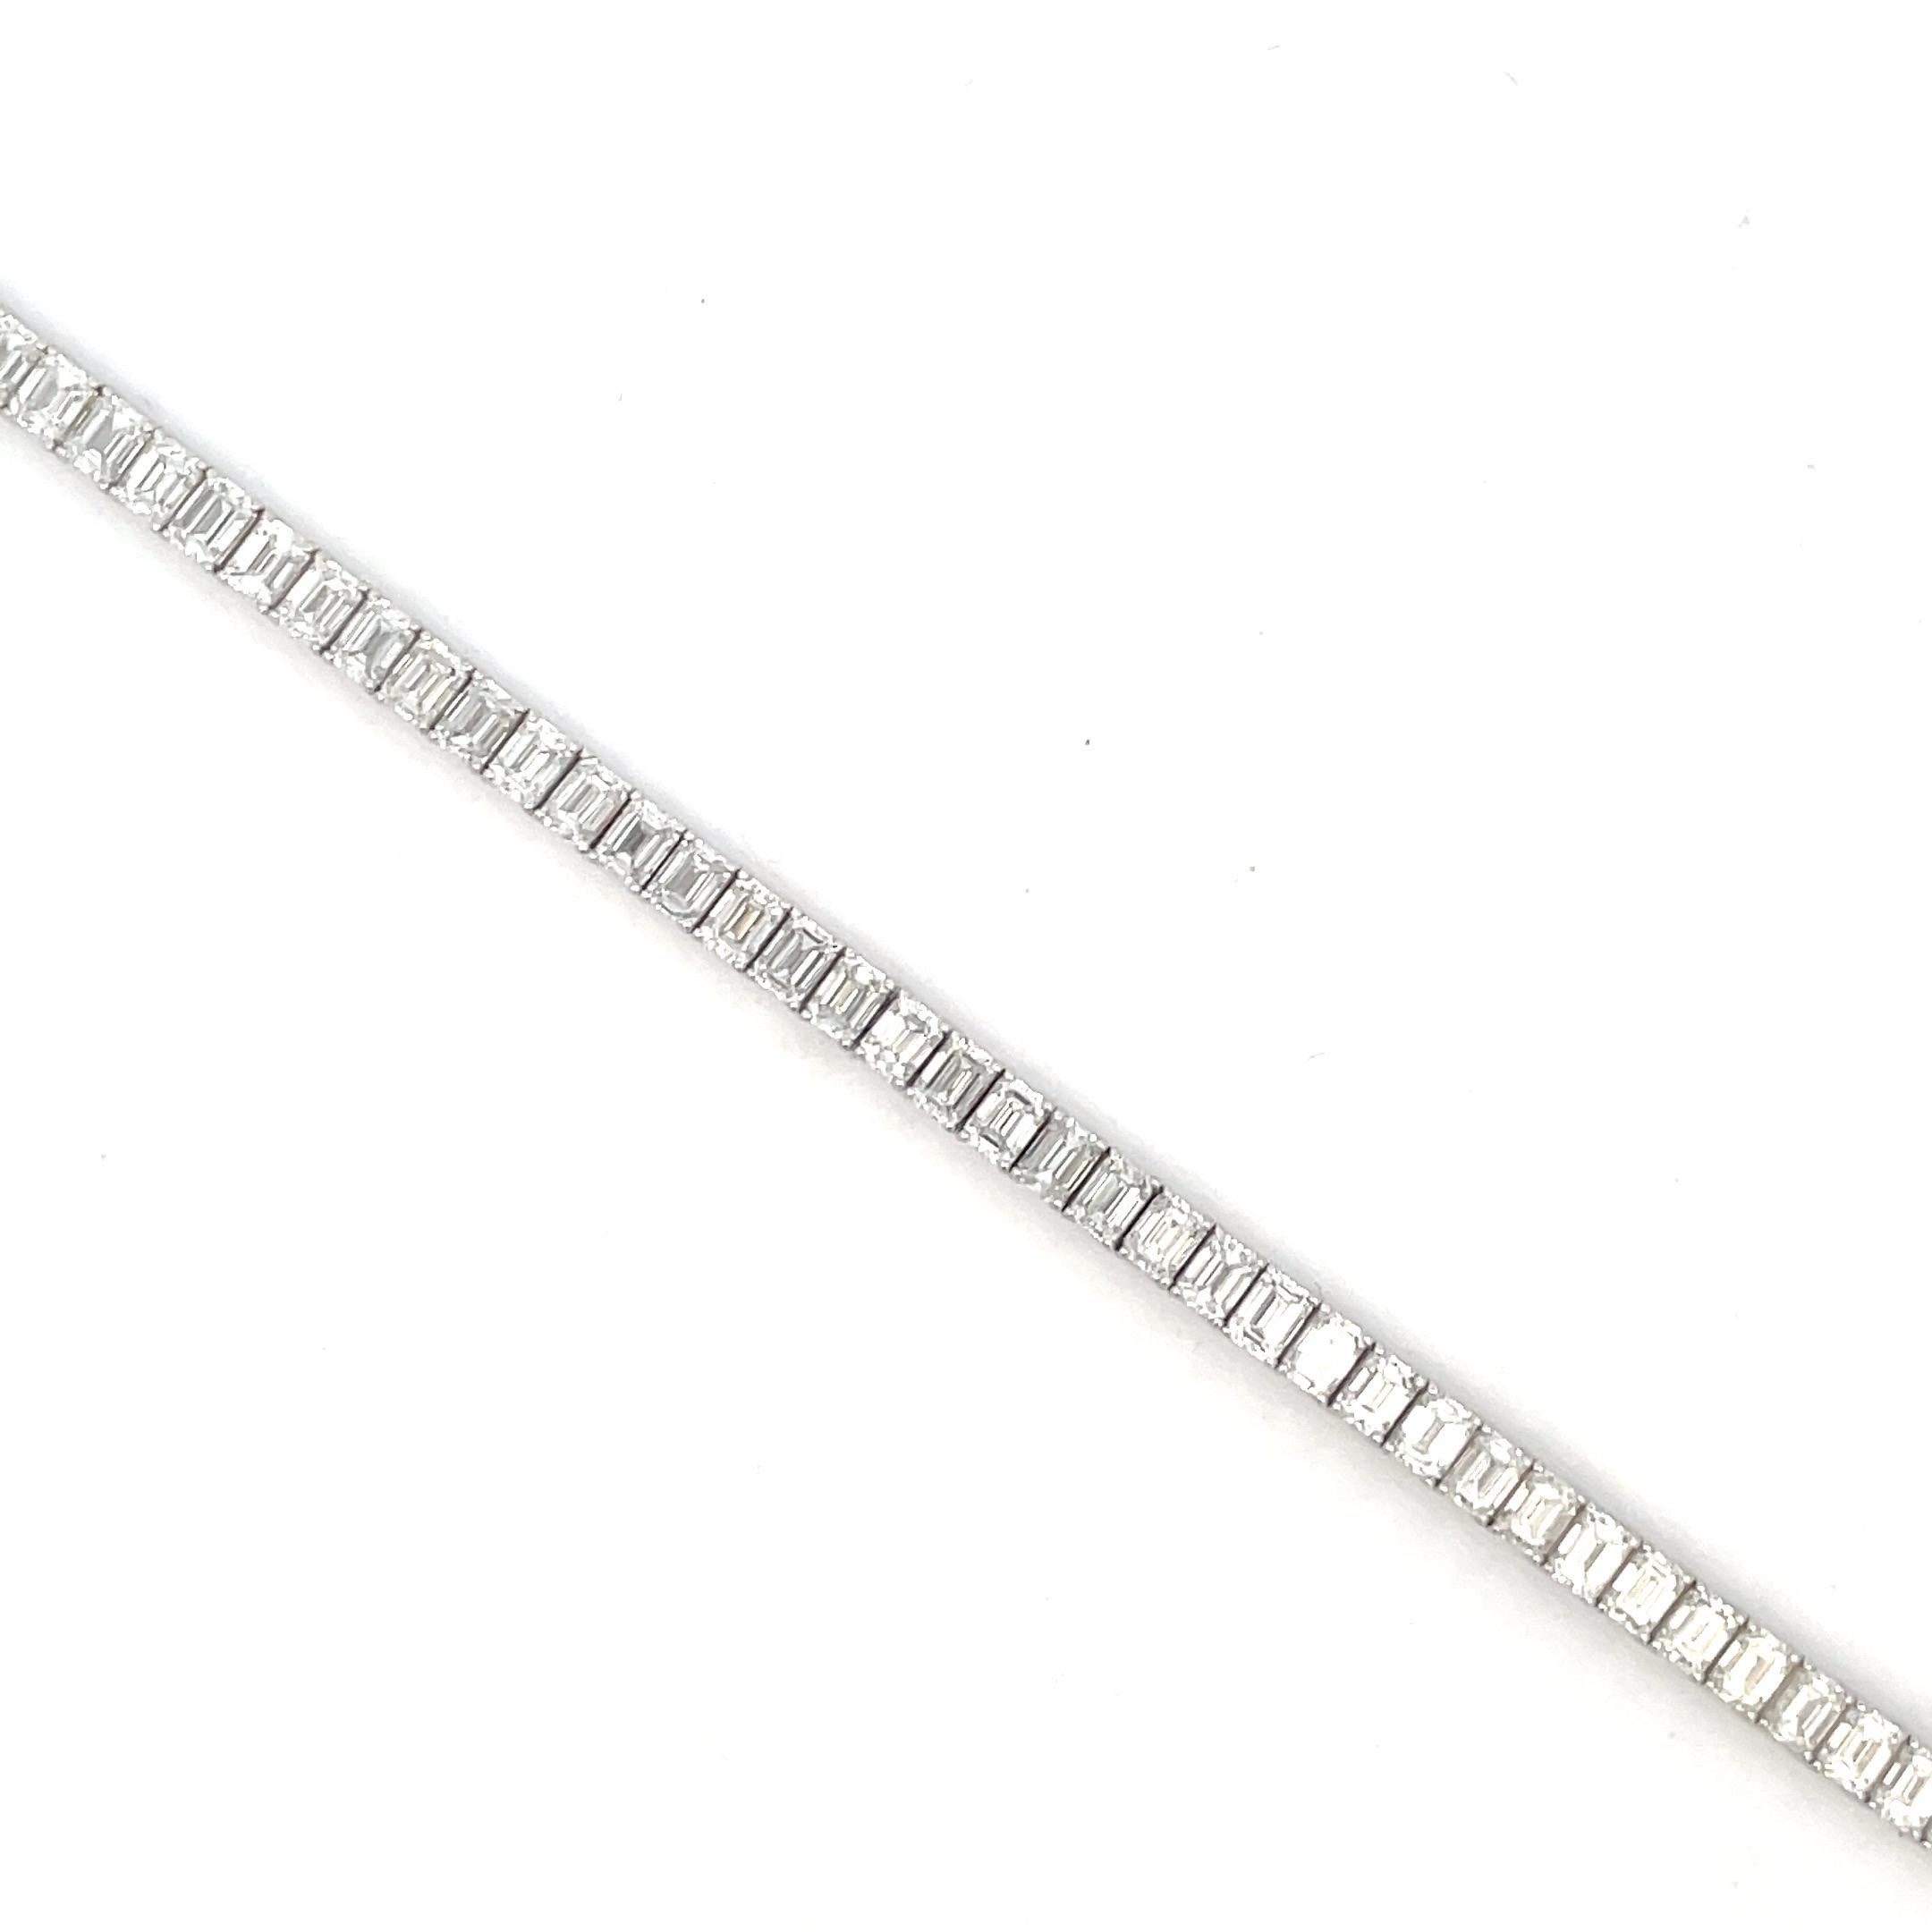 Emerald Cut Diamond Tennis Bracelet 13.04 Carats 14 Karat White Gold G-H VS2 In New Condition For Sale In New York, NY